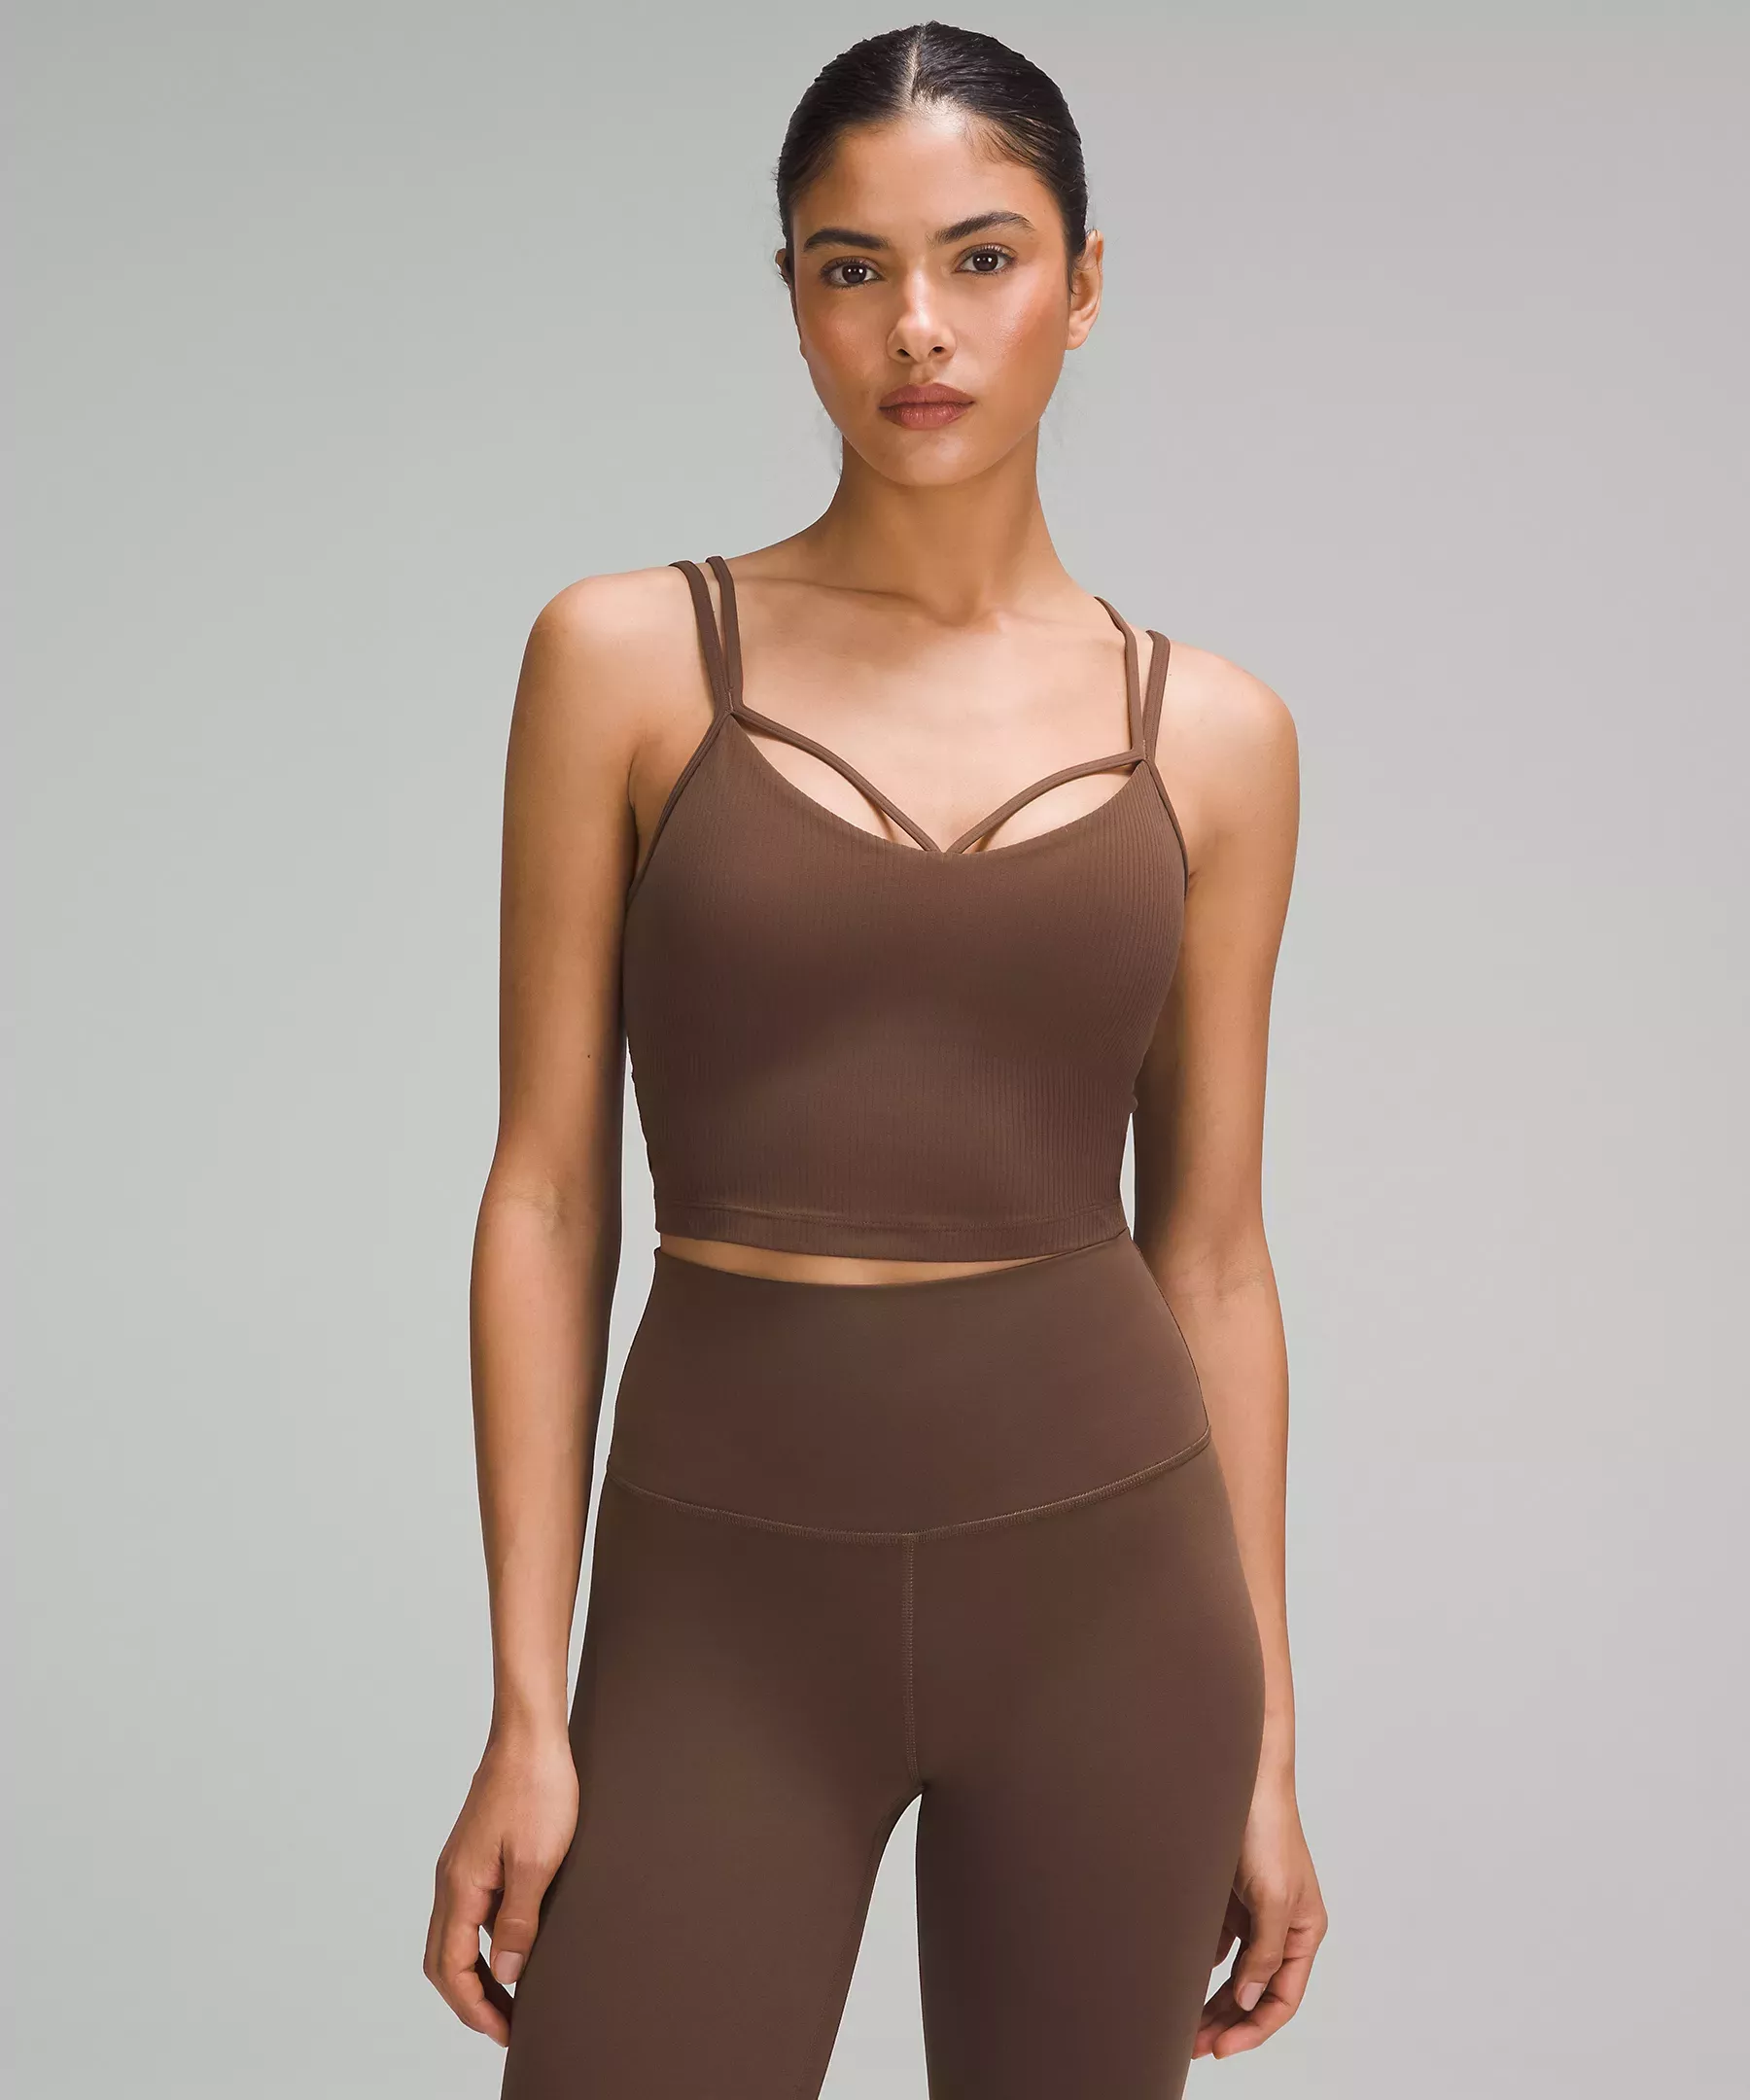 Lululemon Lulu Align Bra In Java Brown Size 34 A - $35 (41% Off Retail) New  With Tags - From Maggie